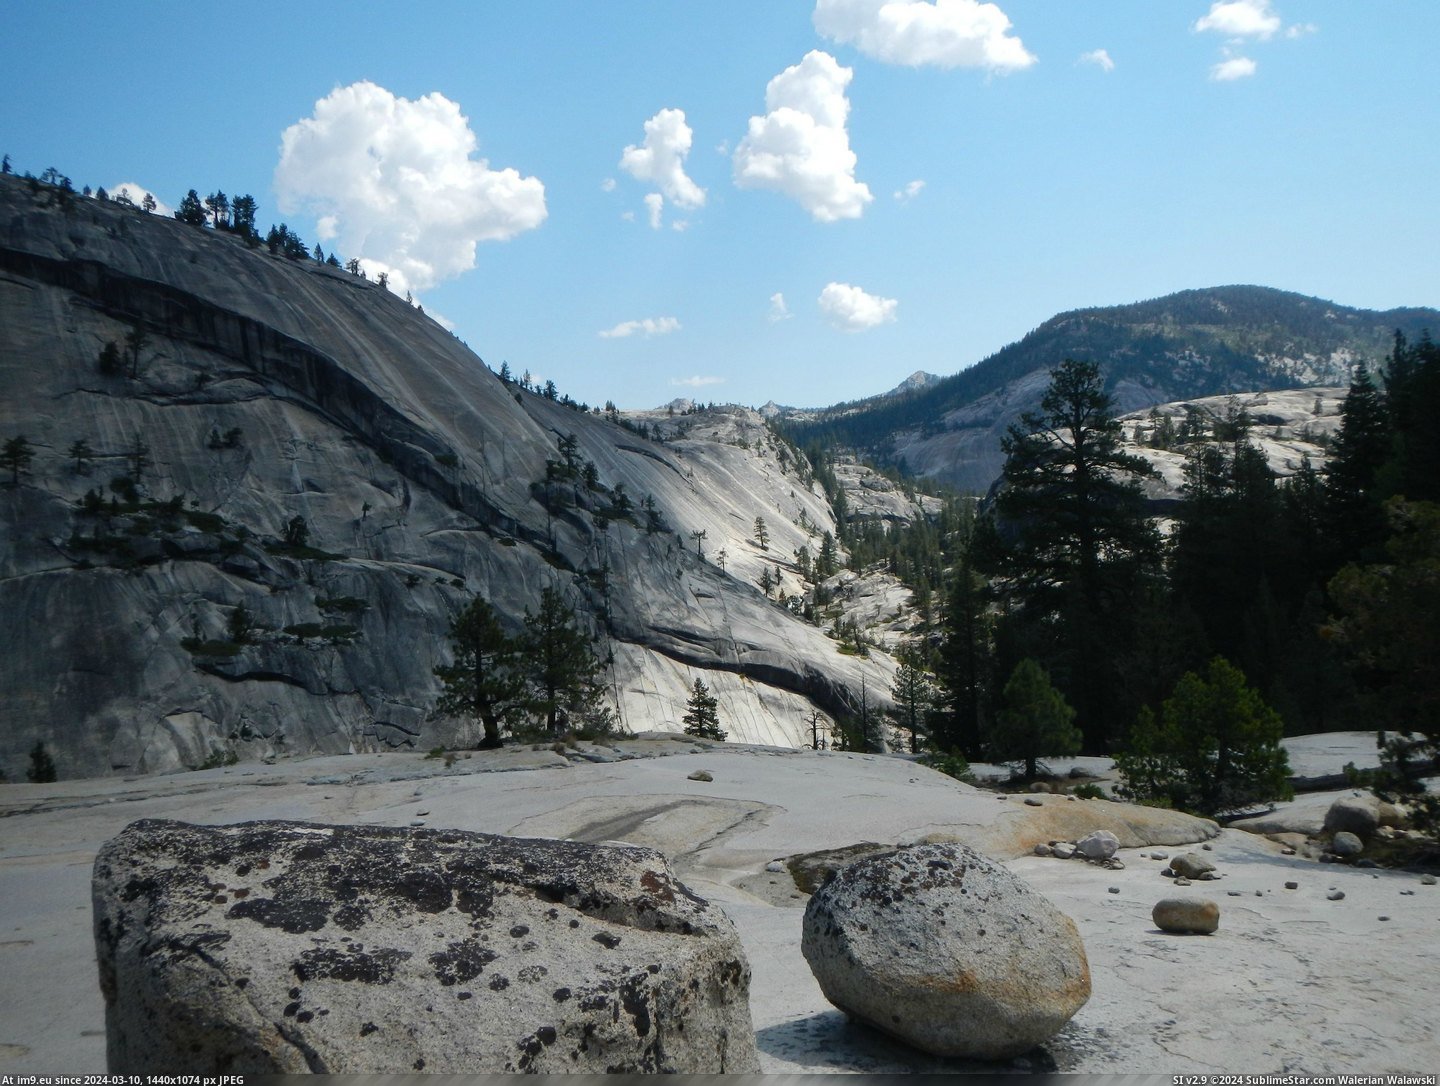 #One #Park #Out #Trip #Hundreds #Stood #Backpacking #National #Our #Yosemite [Earthporn] Out of hundreds of pictures on our backpacking trip this one stood out to me: Yosemite National Park. [OC] [4608x345 Pic. (Bild von album My r/EARTHPORN favs))